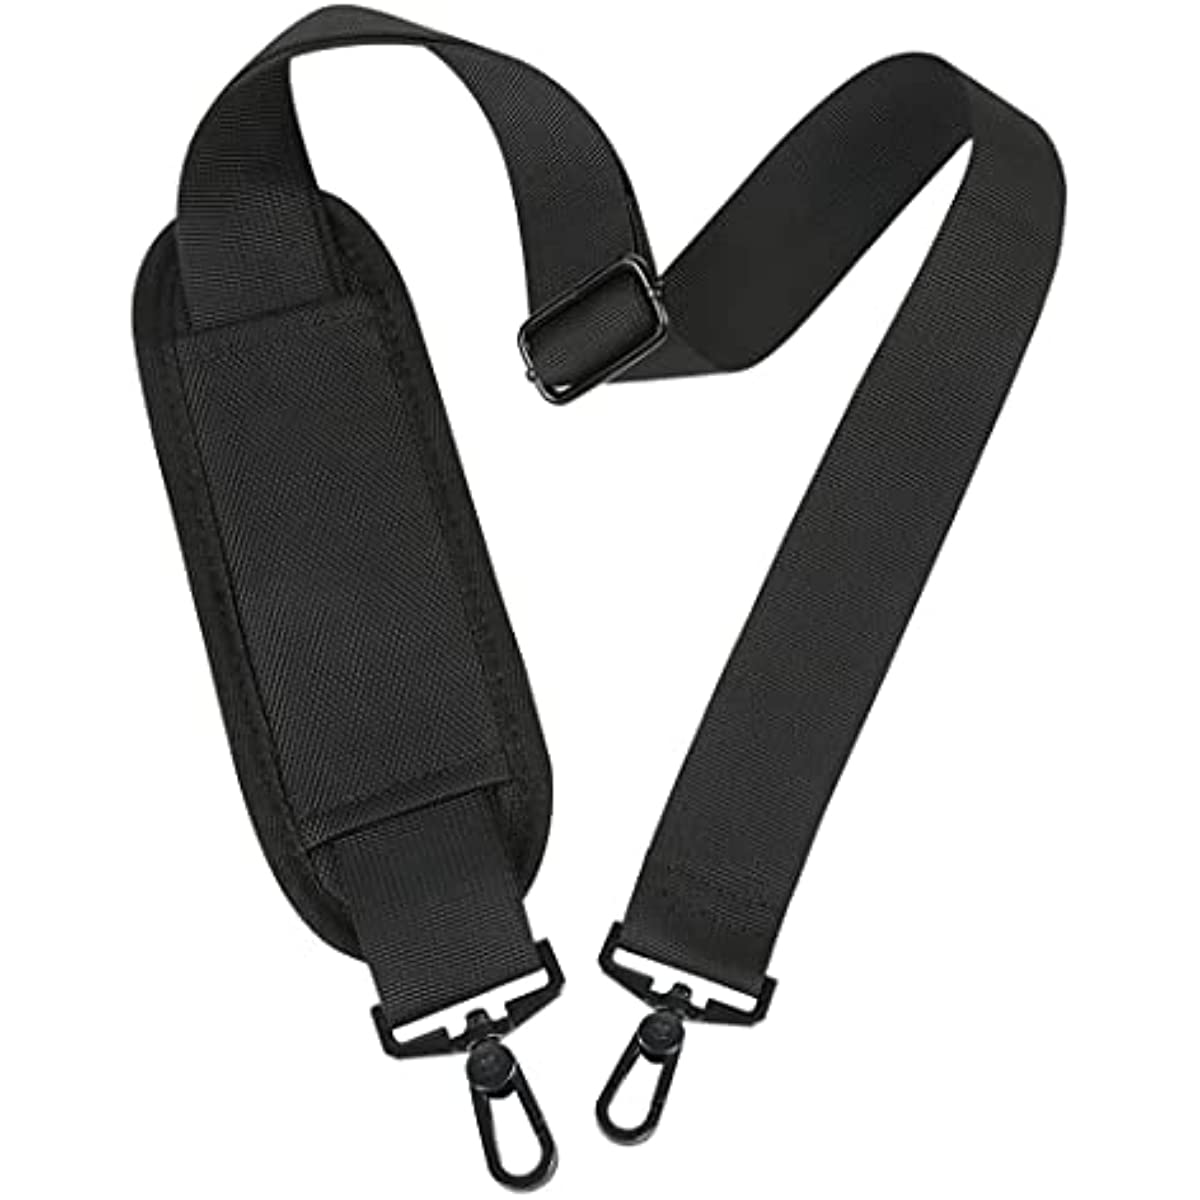 Valqst Adjustable Shoulder Straps - Perfect Replacement Crossbody Straps  For Bags, Purses, Backpacks, And Duffel Bags - Comfortable And Durable With  Hooks For Easy Attachment - Temu